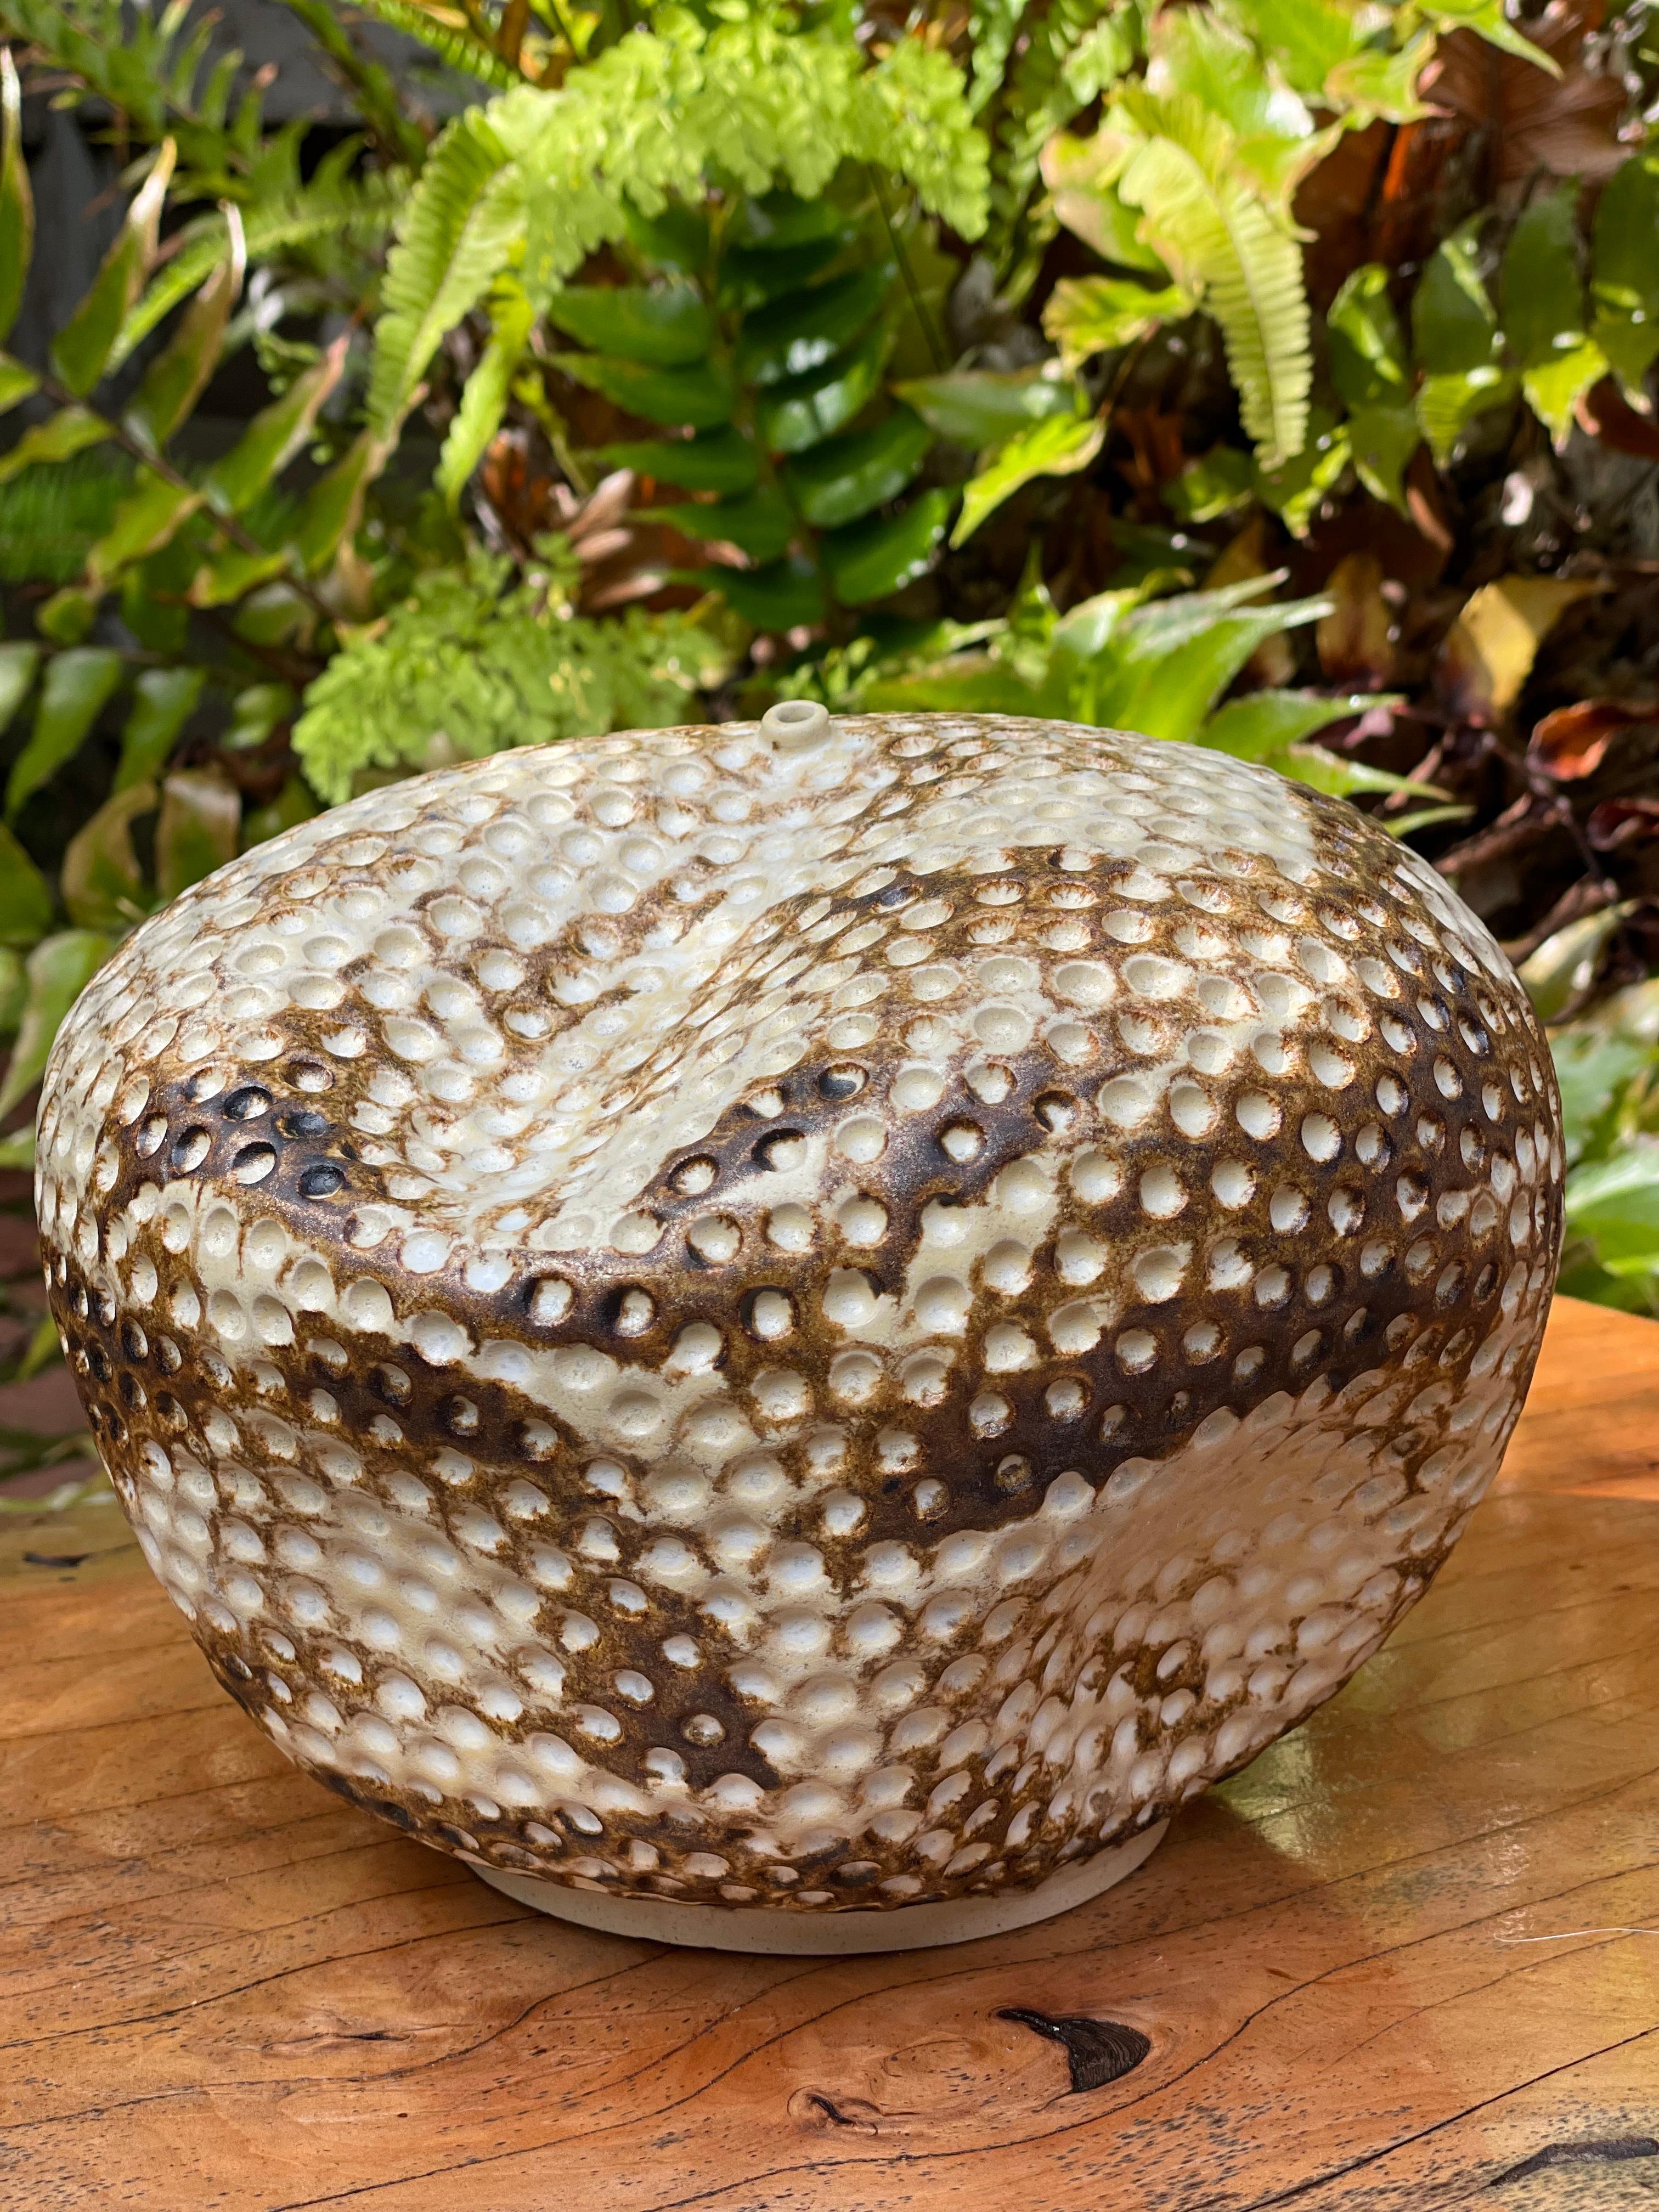 Joseph Skoby is a Southern Californian whose work is inspired by the nature of his native state. His ceramics, created in his own lush garden, recall his intimate dance with the ocean as a lifelong surfer, a pure form of self-expression that